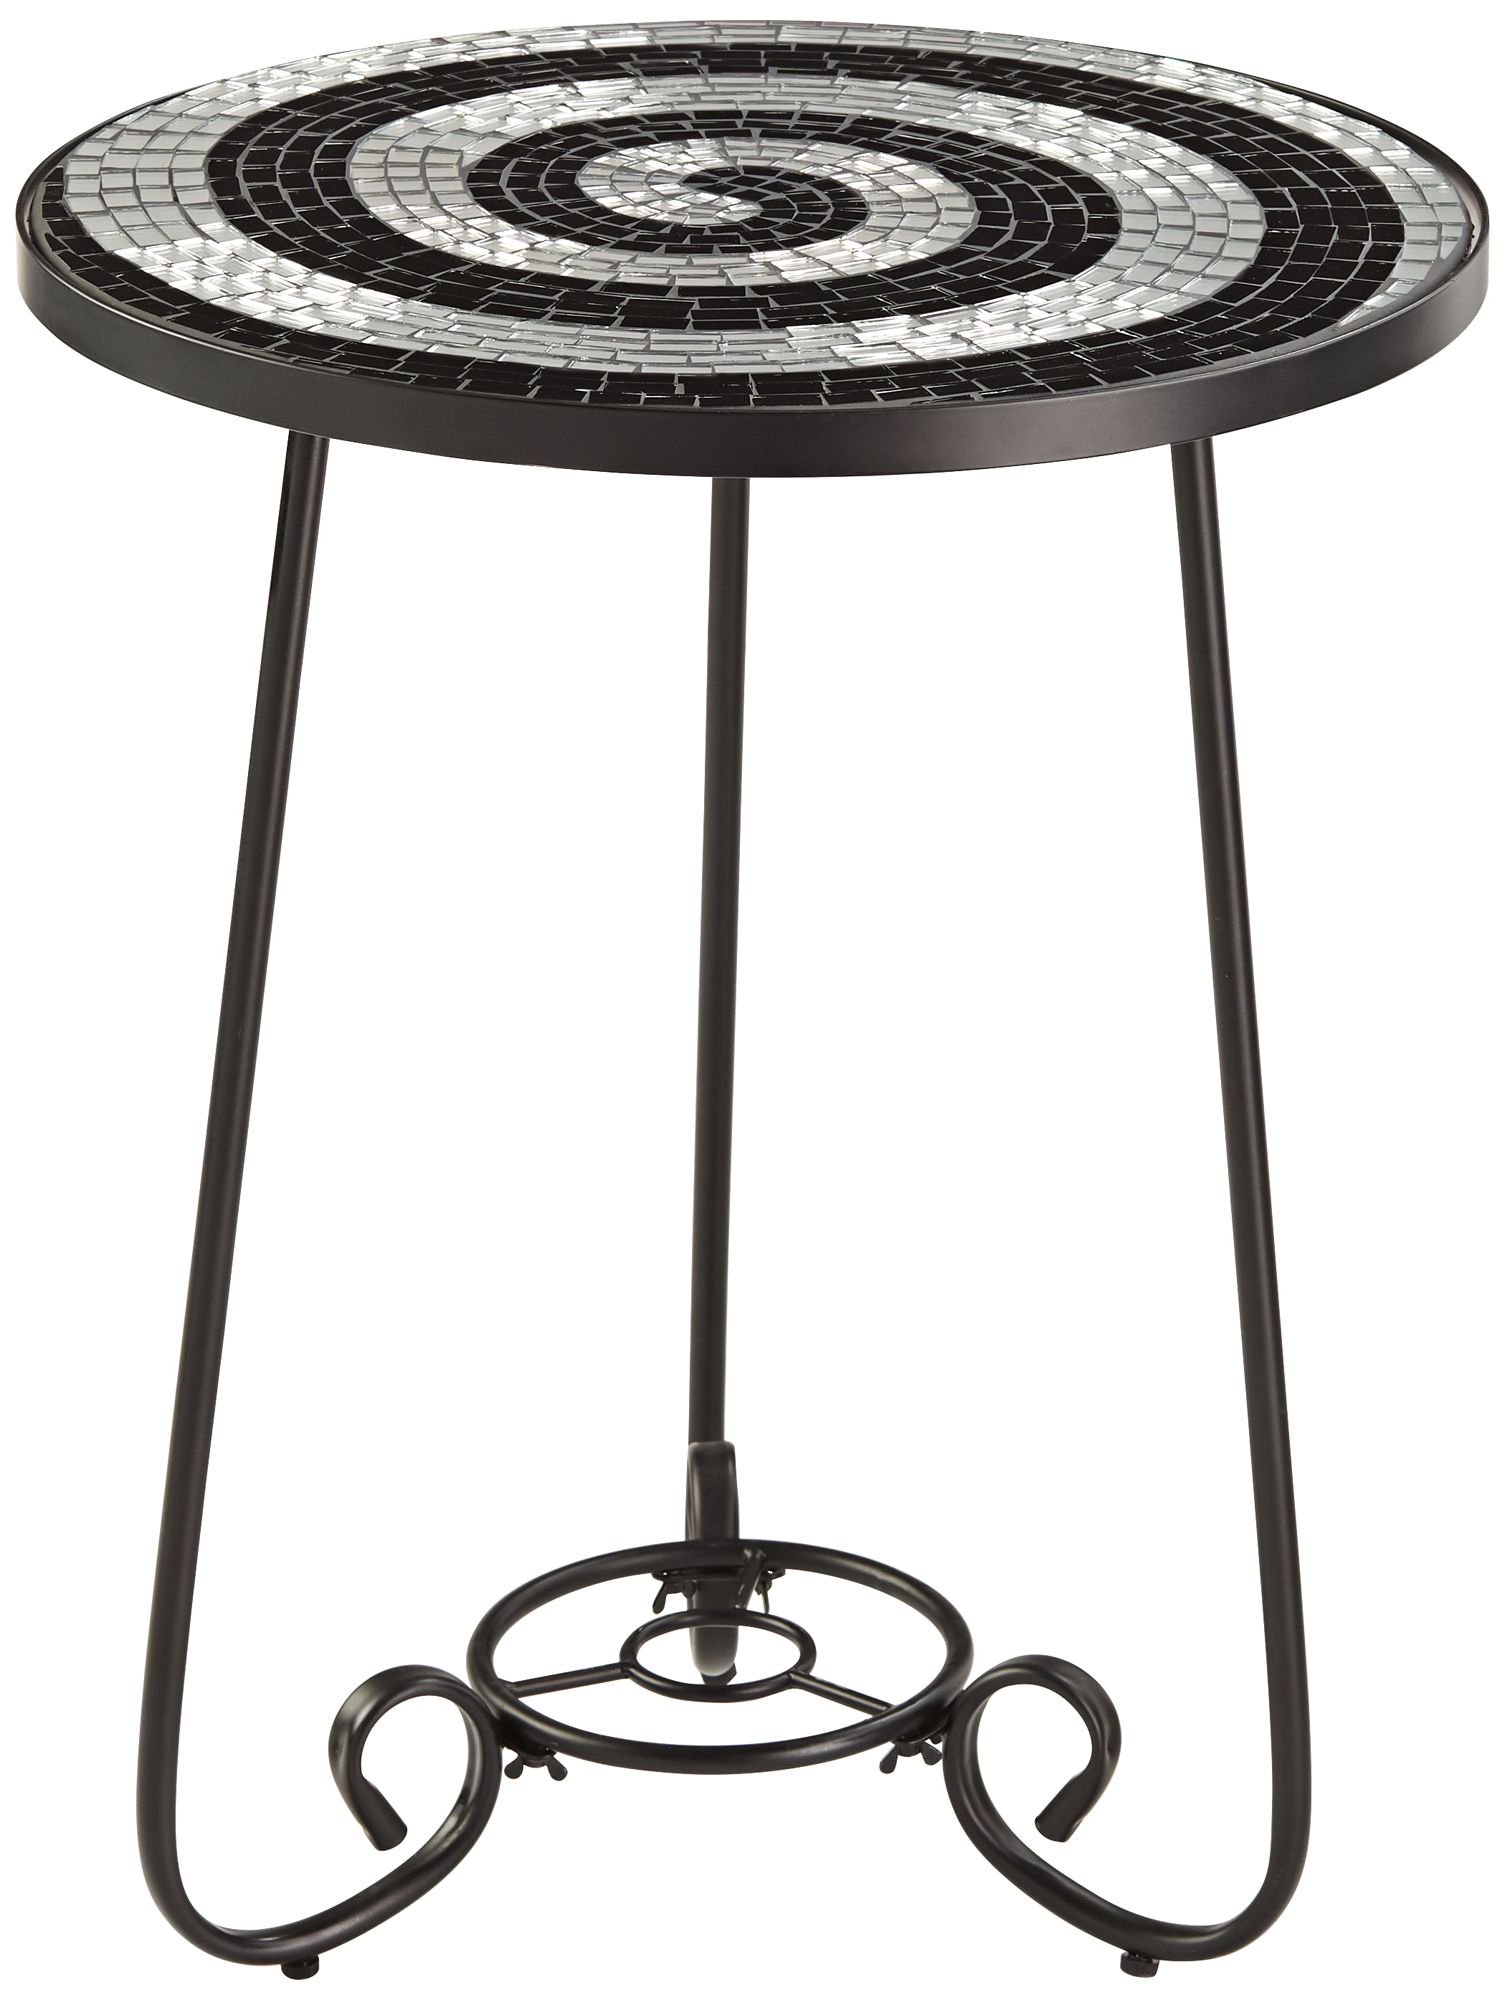 Teal Island Designs Modern Black Round Outdoor Accent Side Table 17 3/4" Wide Black White Tile Mosaic Tabletop Front Porch Patio Home House - image 2 of 8